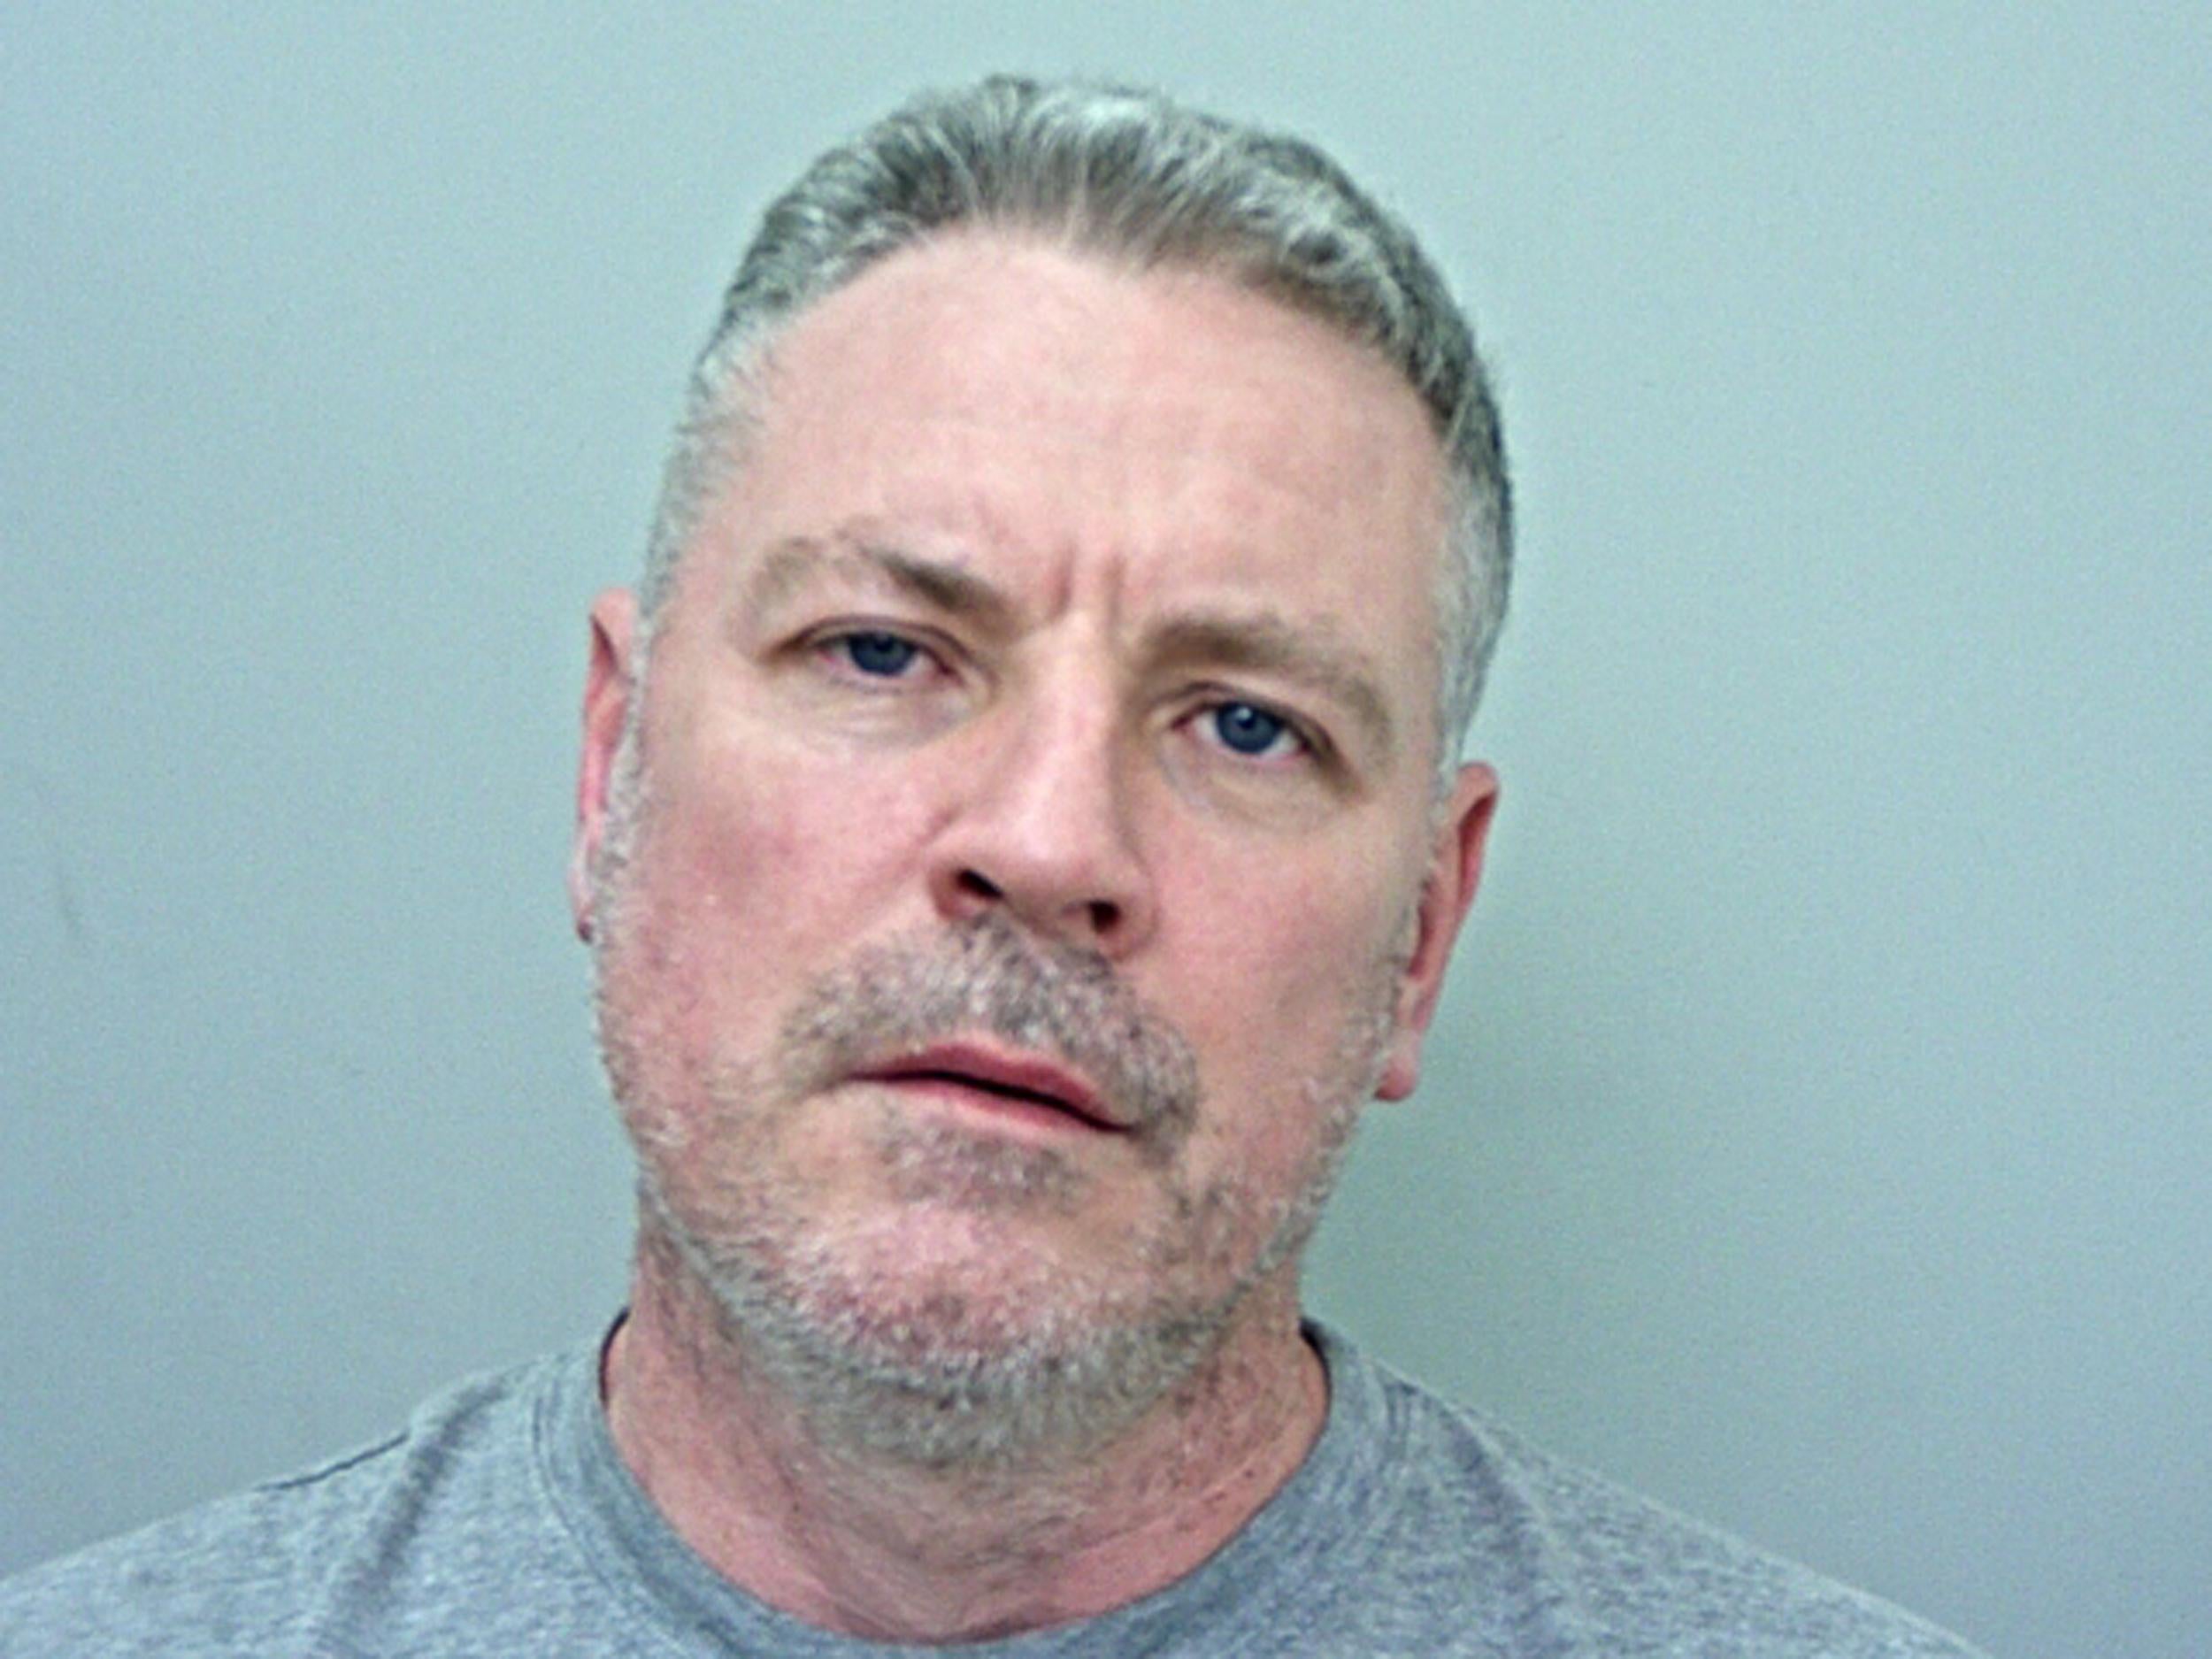 Moseley shot Lee Holt with a semi-automatic weapon following a dispute between the two men's sons